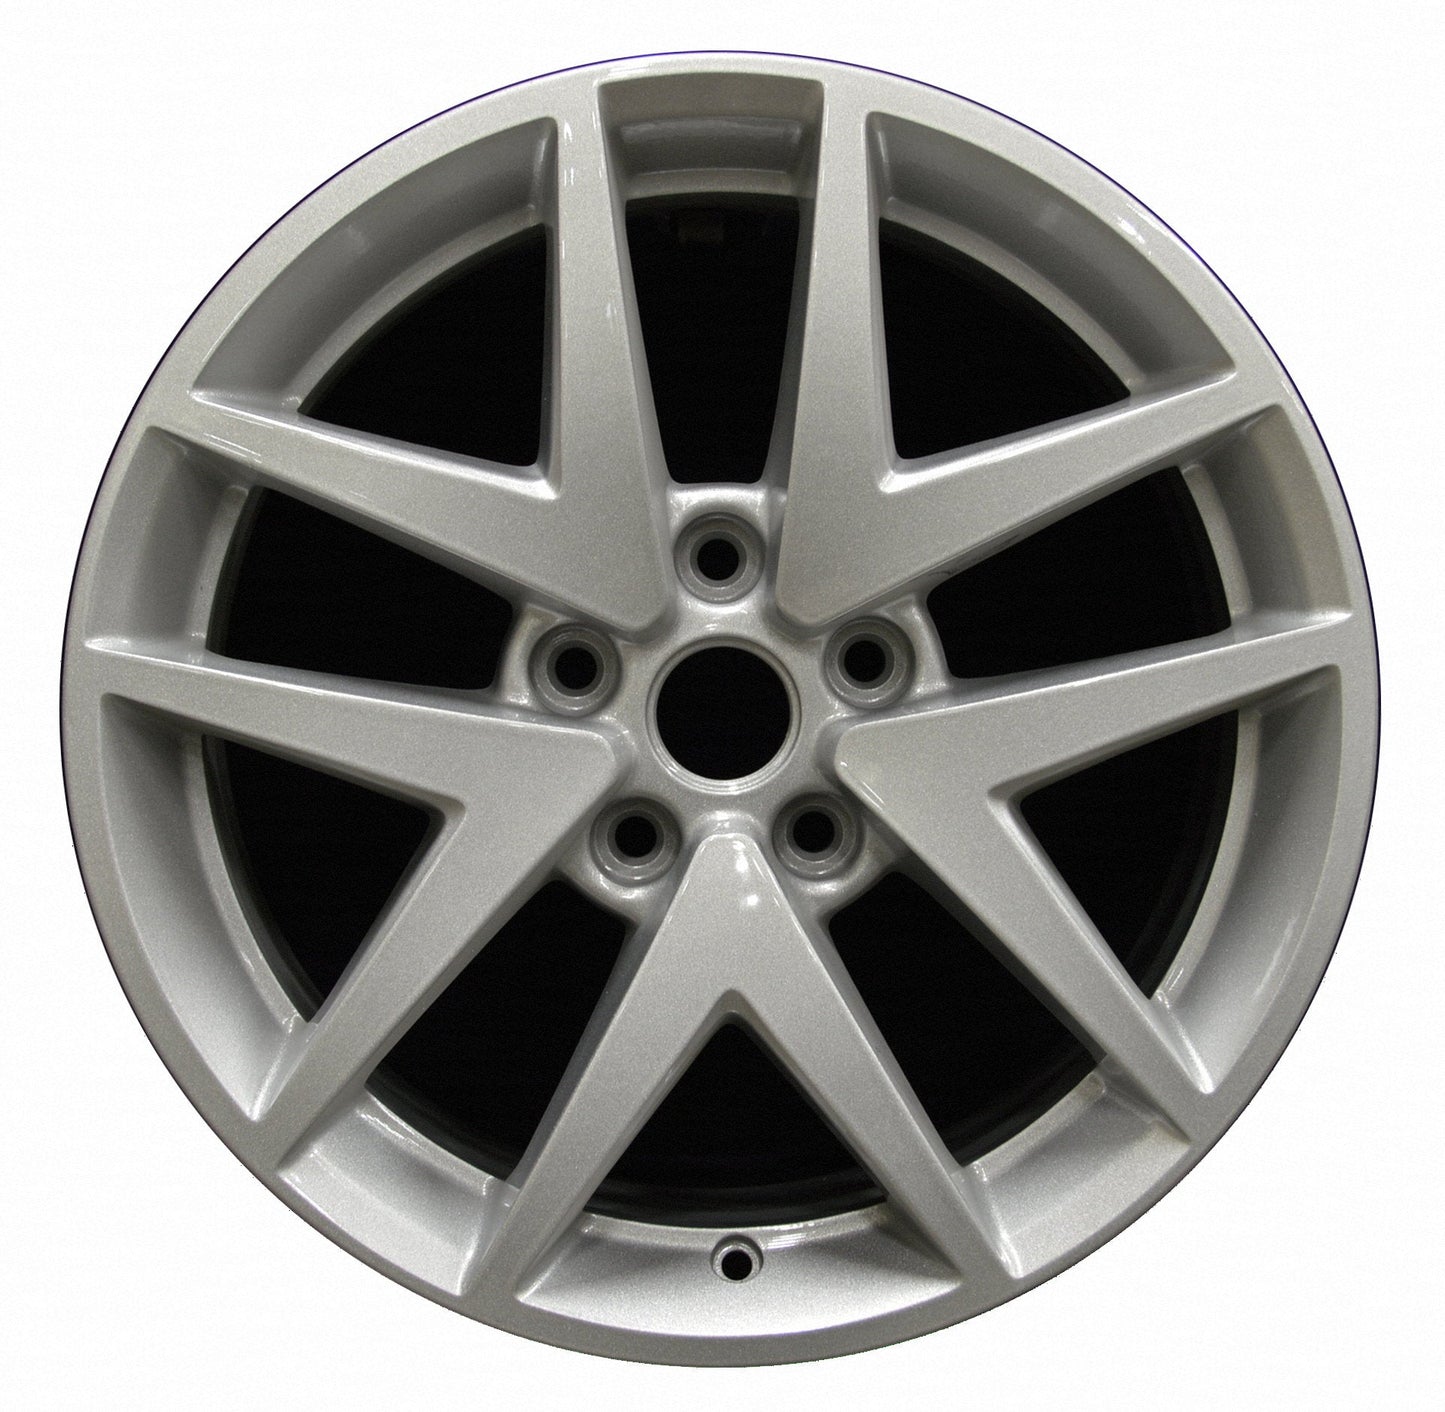 Ford Fusion  2010, 2011, 2012 Factory OEM Car Wheel Size 17x7.5 Alloy WAO.3797.PS08.FF